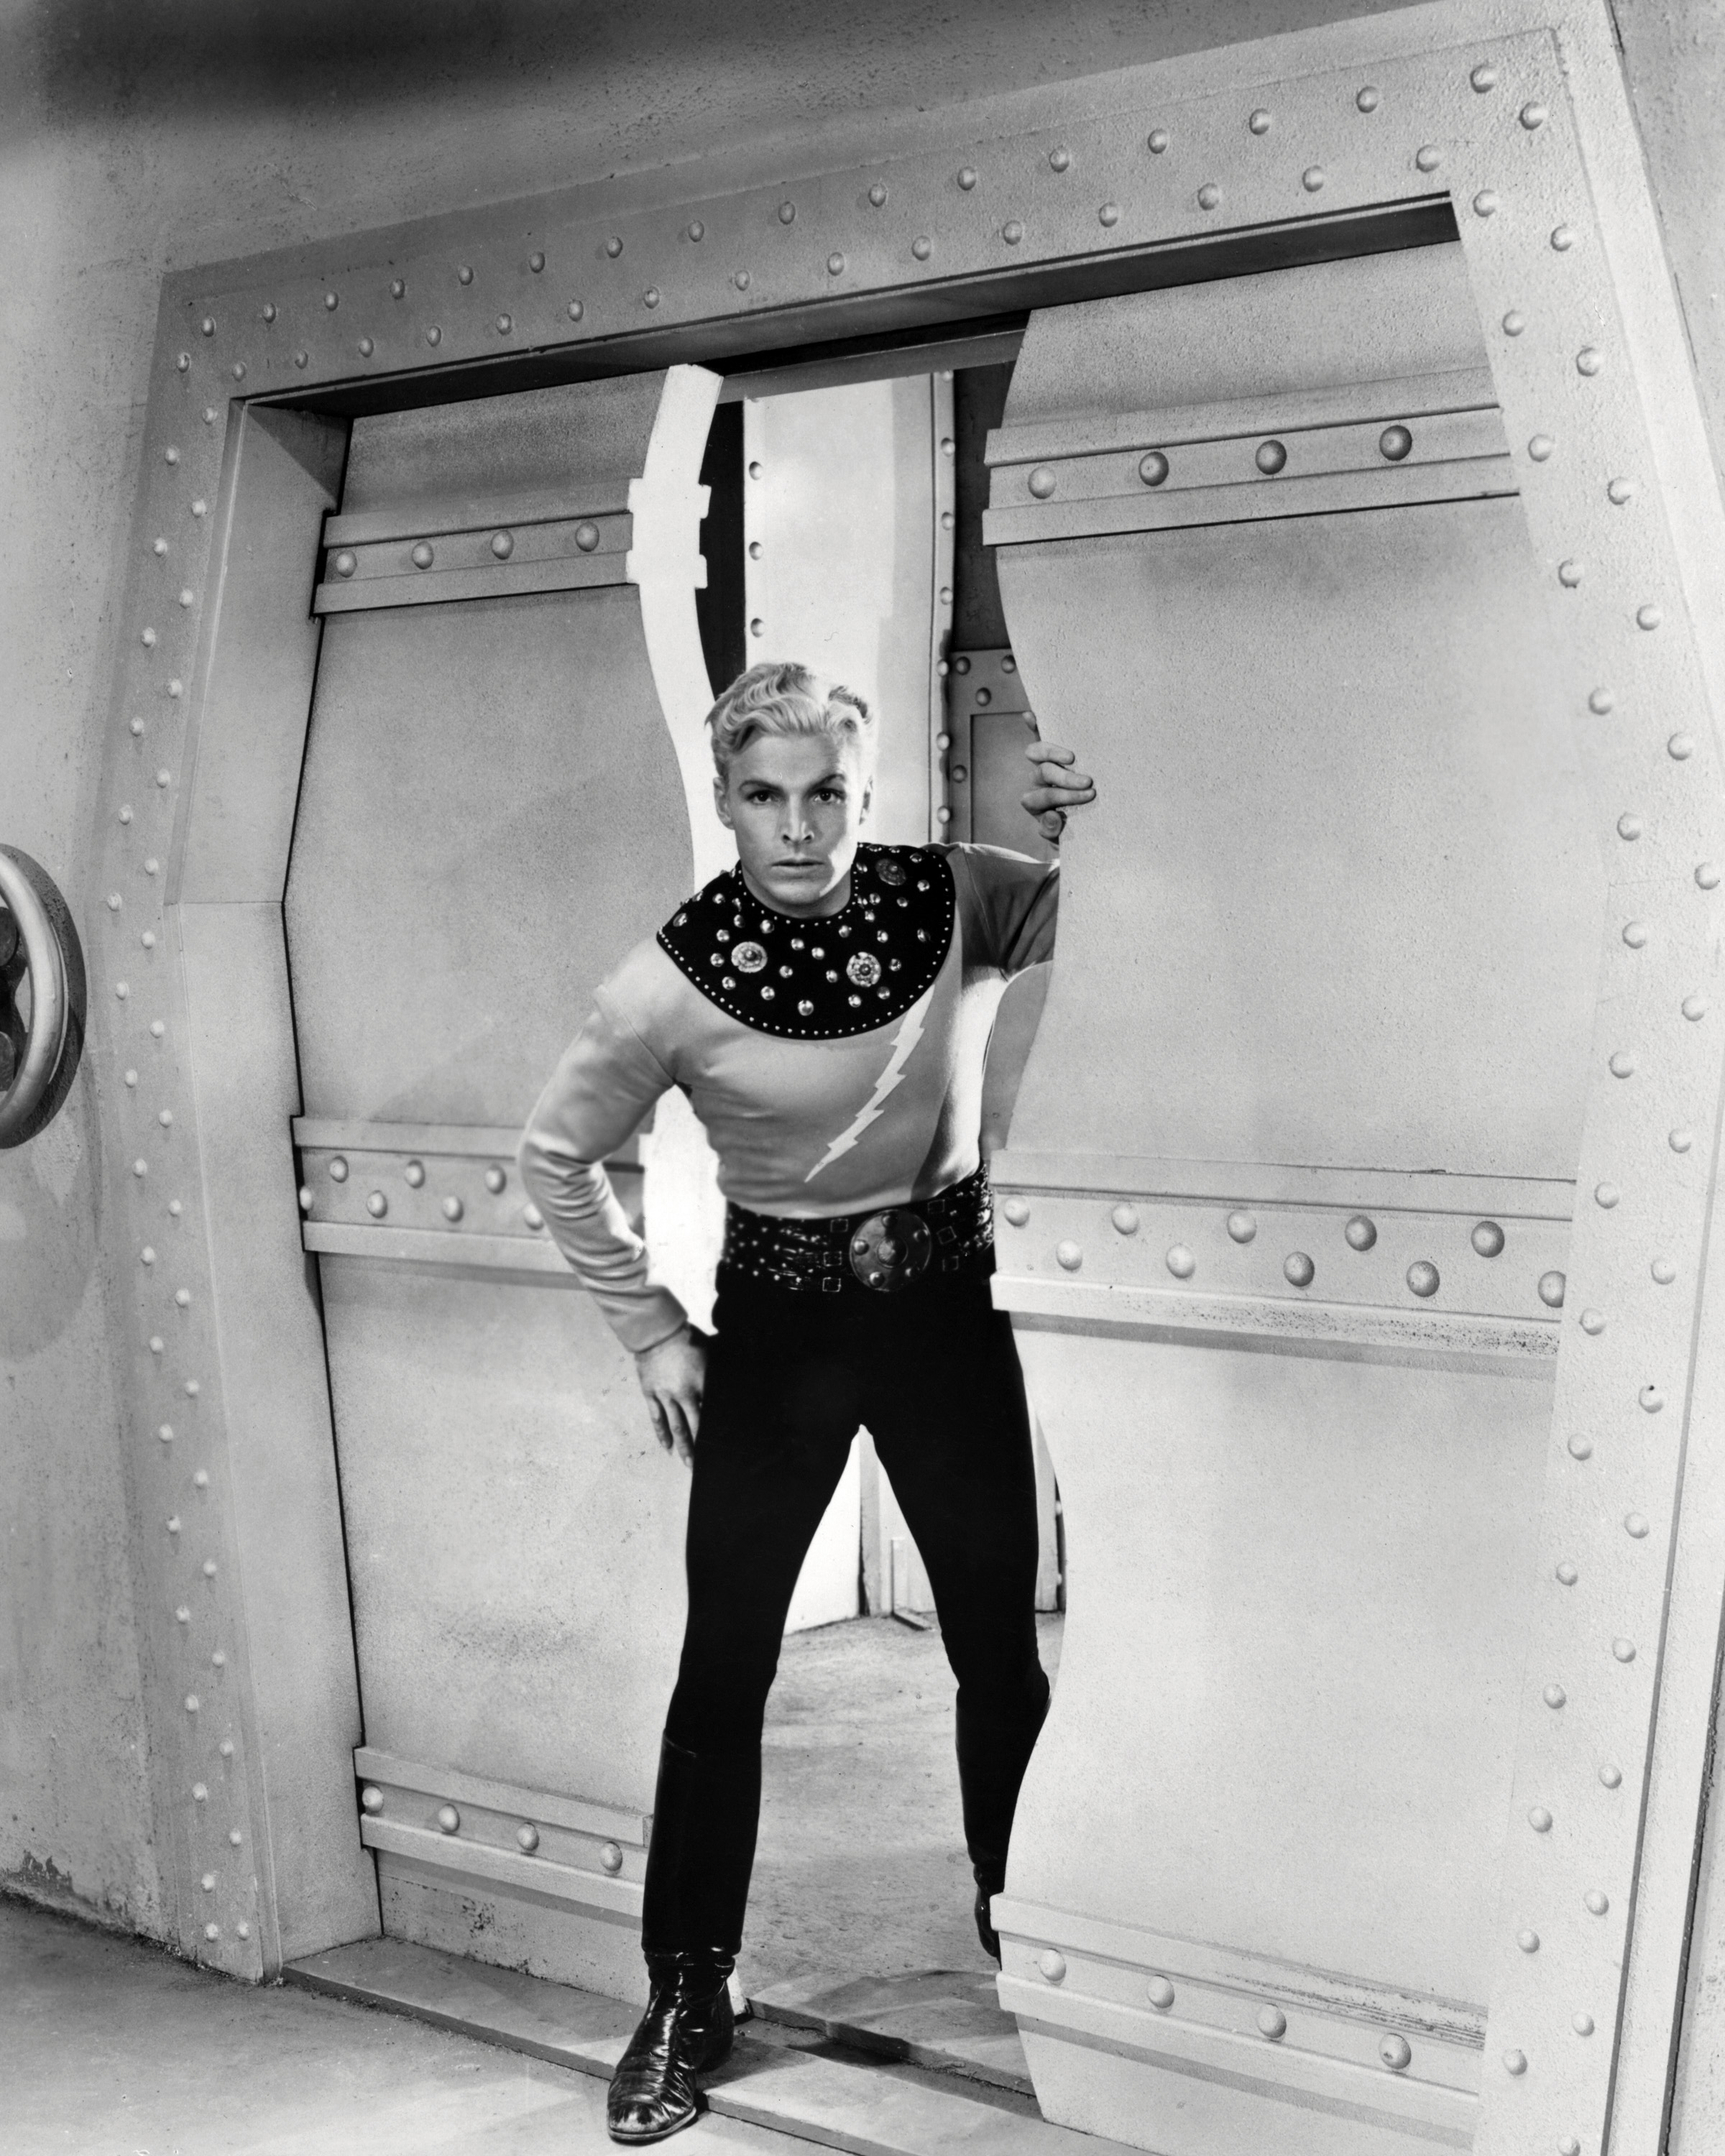 American athlete and actor Buster Crabbe in the title role of 'Flash Gordon', 1936. (Silver Screen Collection—Getty Images)